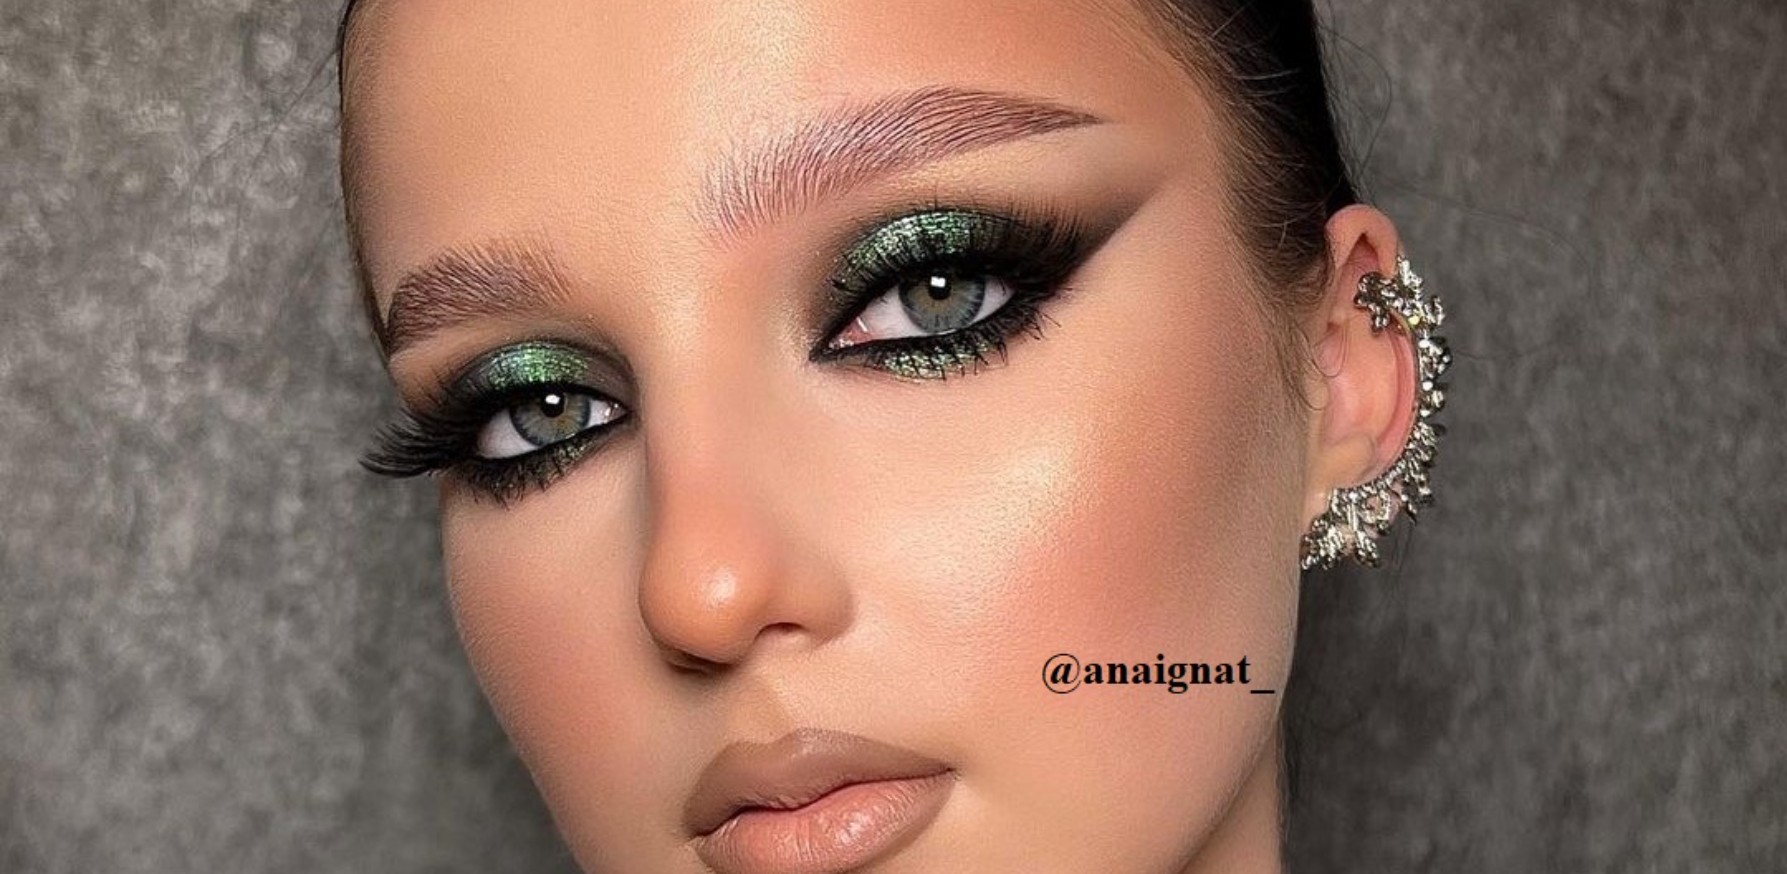 Incorporate Green Into Your Looks For A Sexy Night Out Makeup Look